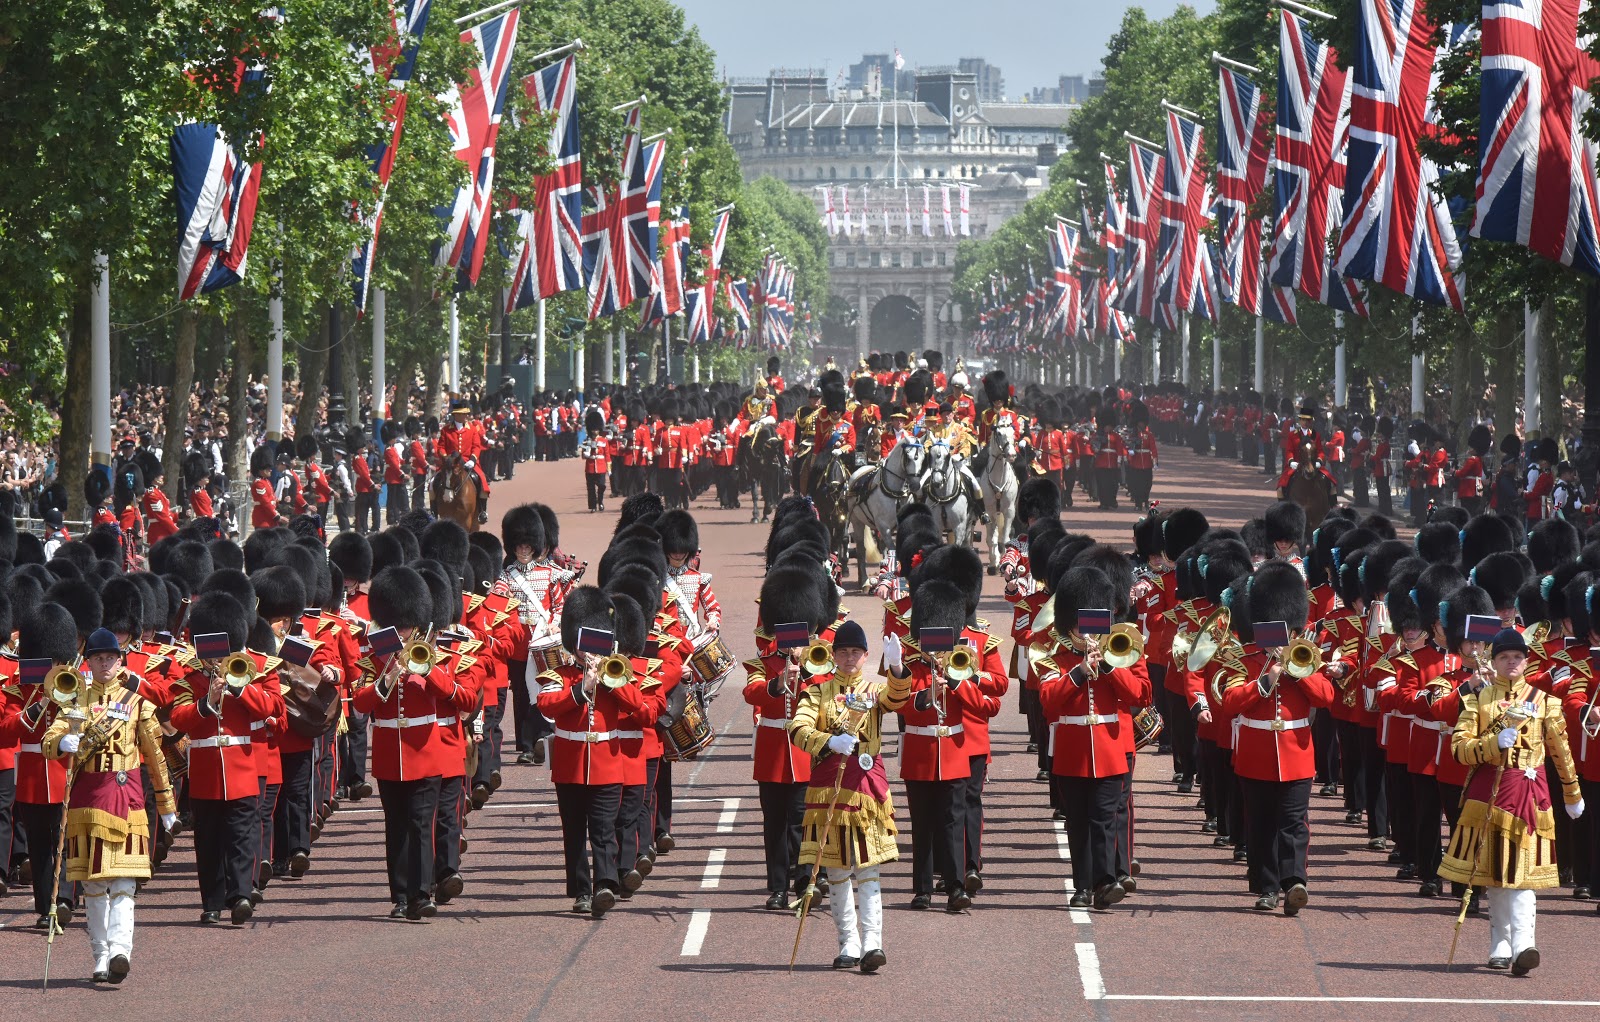 Guards and military bands march up the Mall in London in the Queen's annual birthday parade of Trooping the Colour